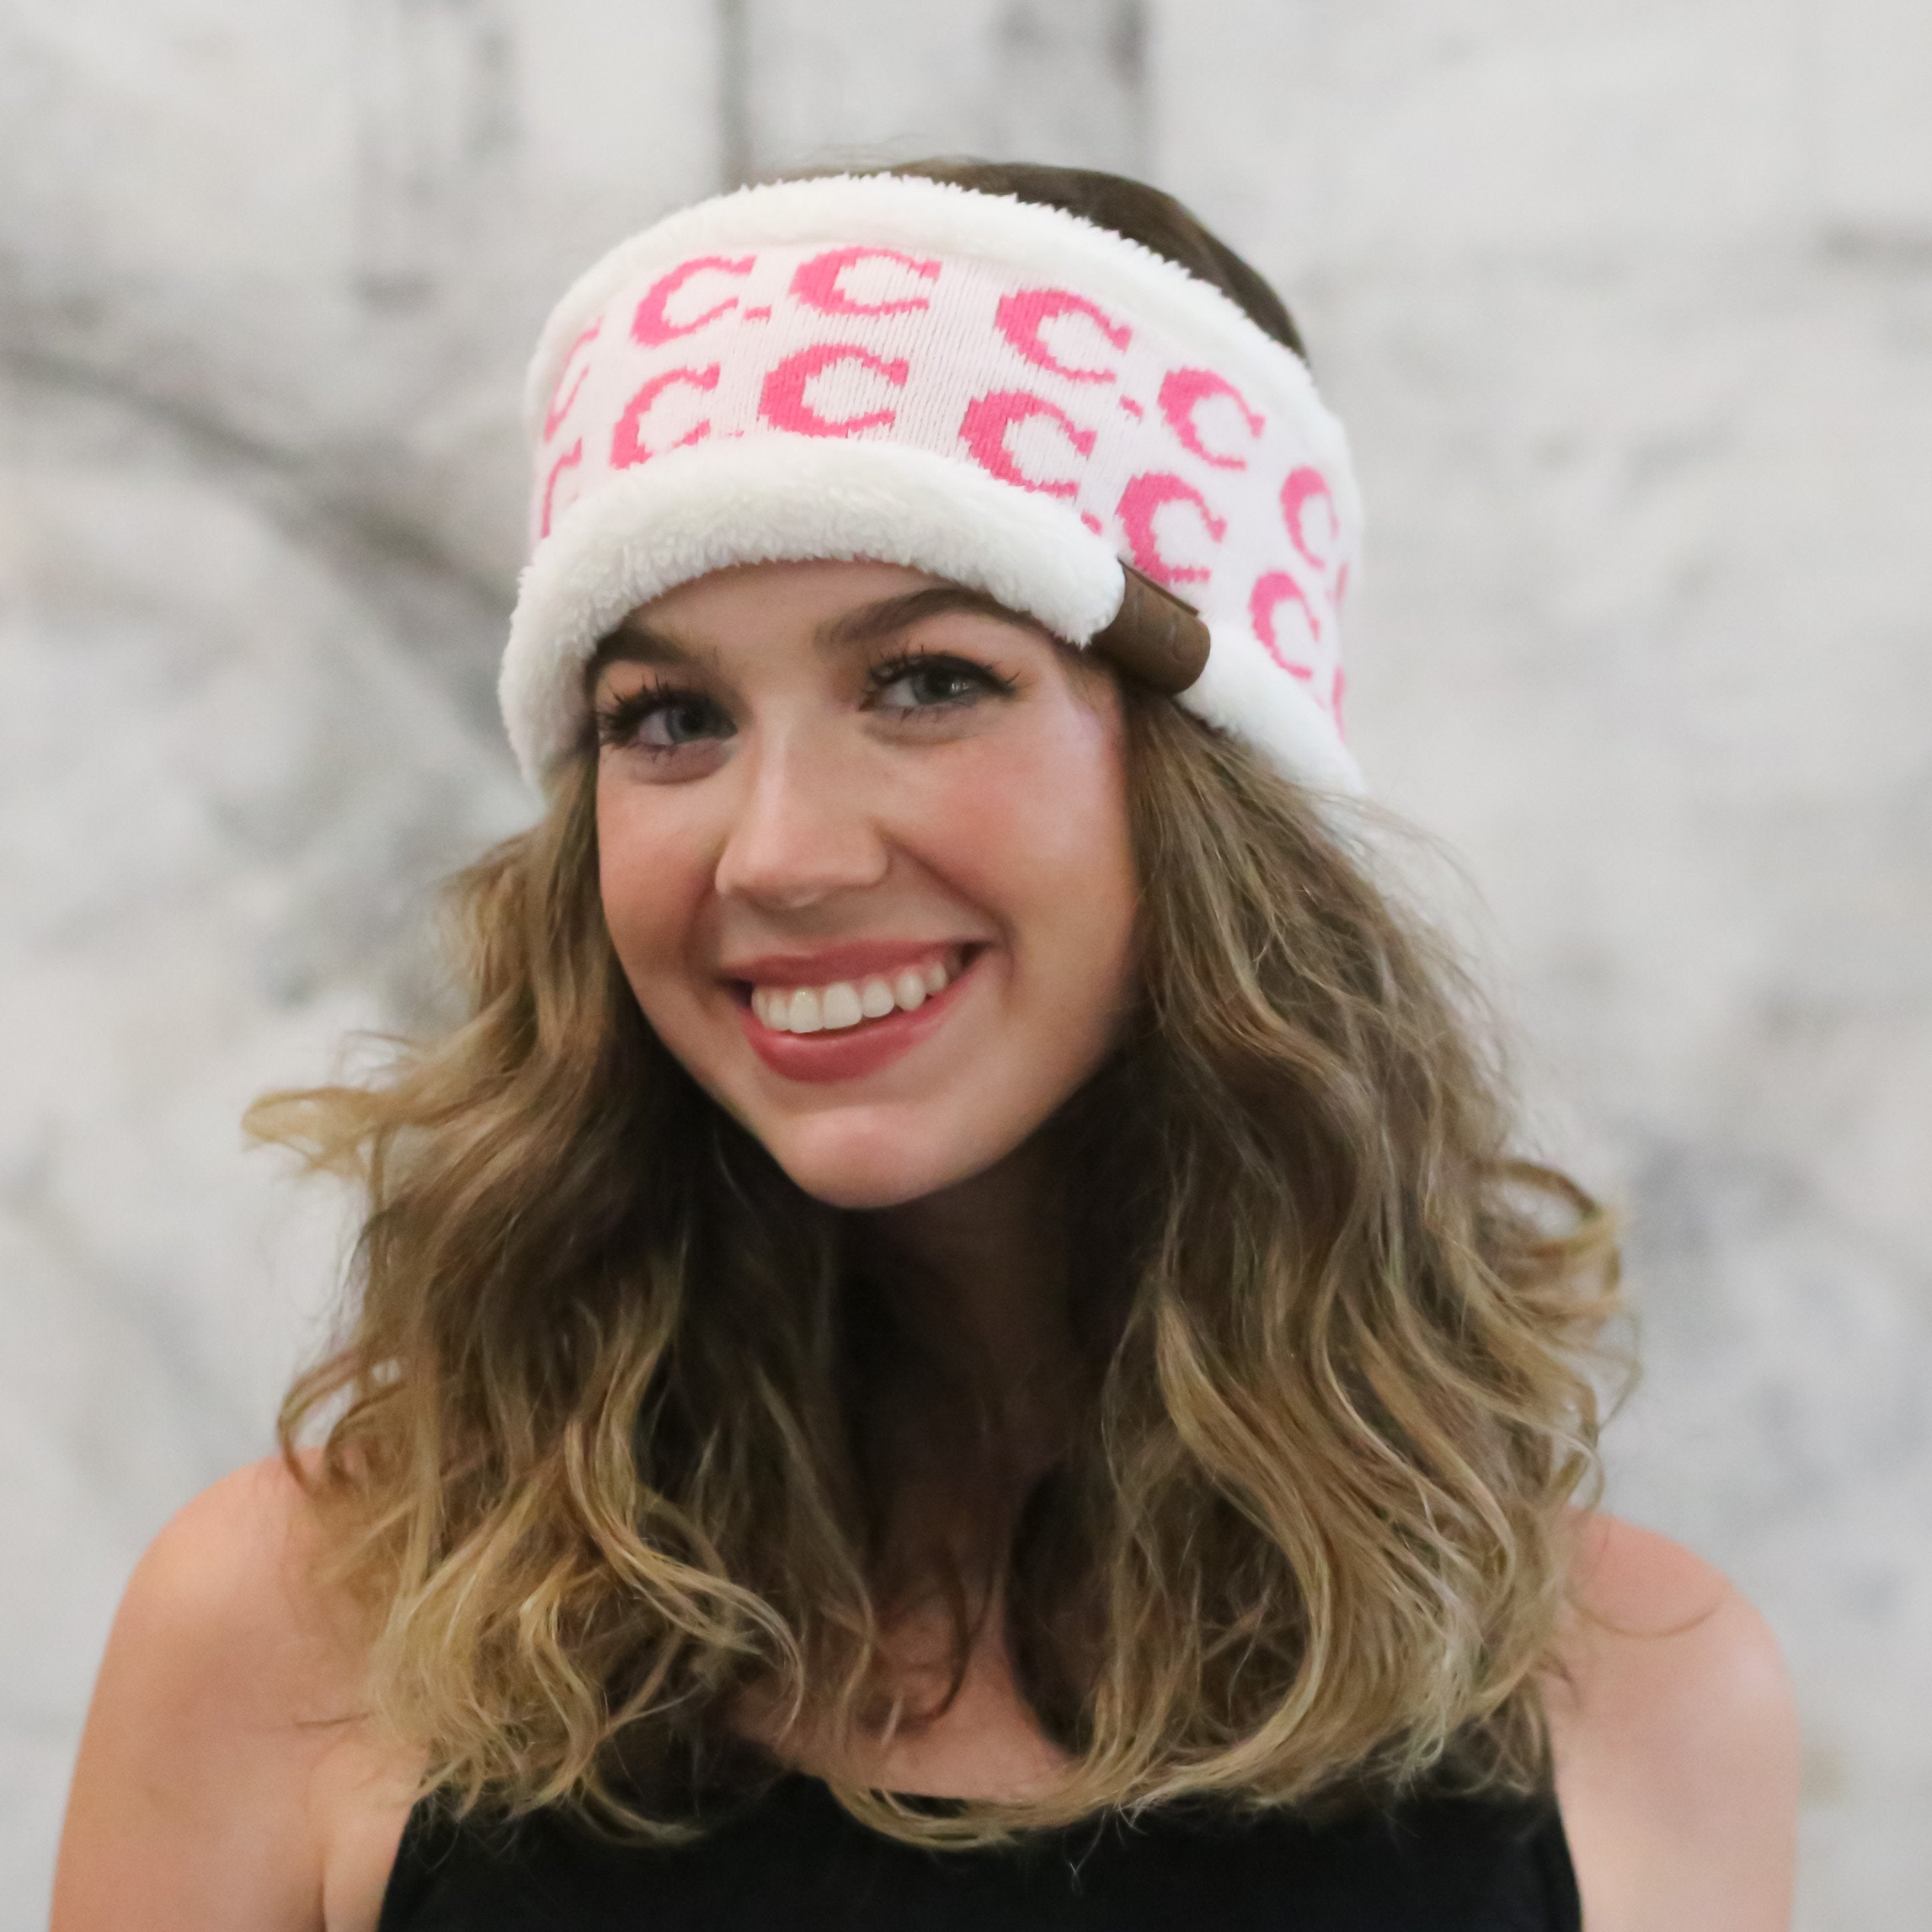 HW-14 IVORY/NEW CANDY PINK LOGO HEADWRAP